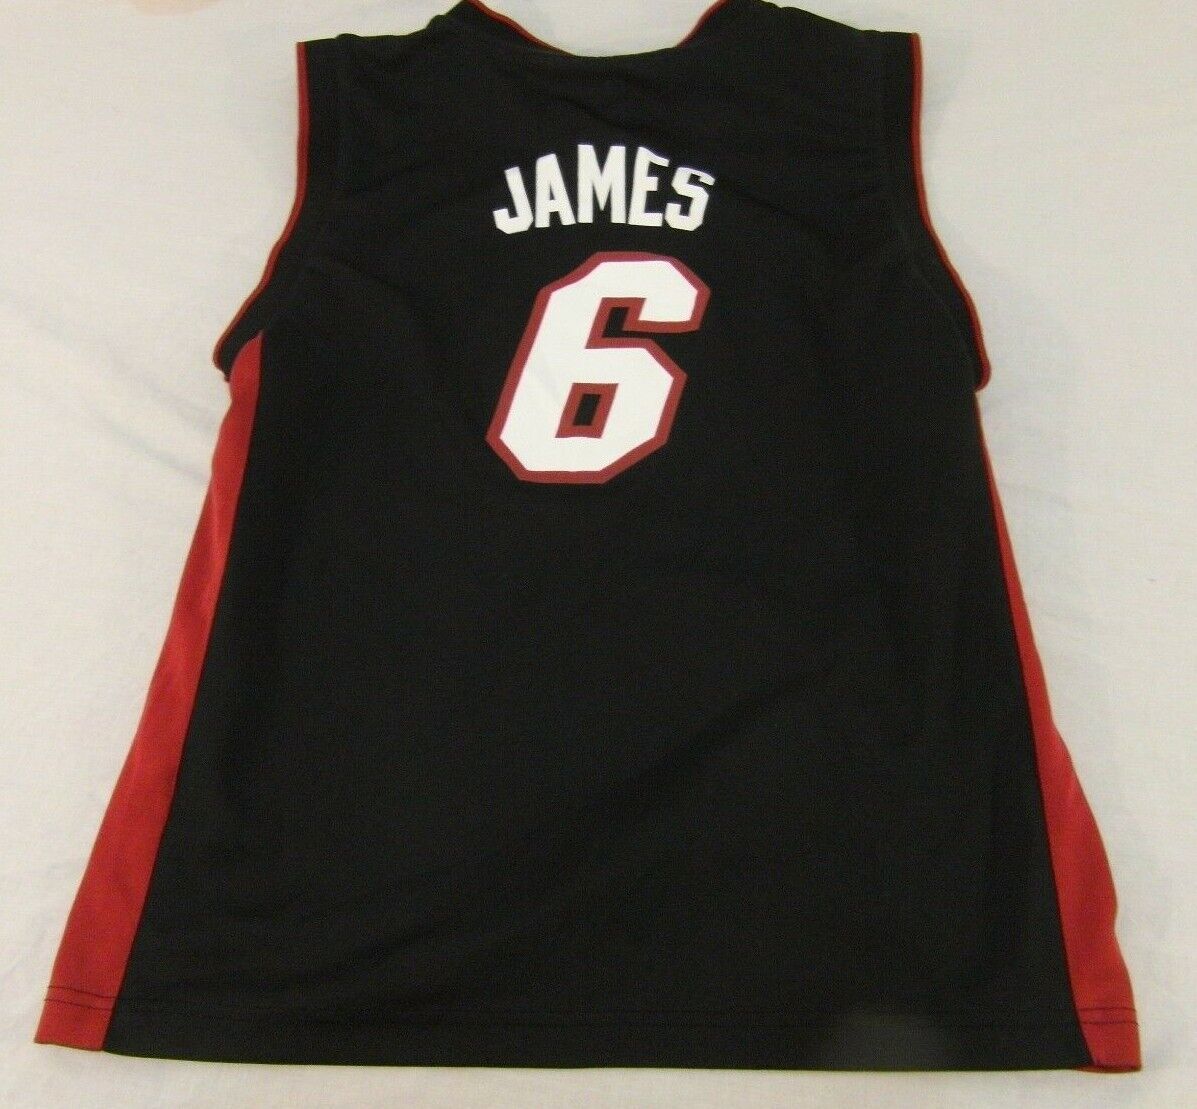 Primary image for Youth Large NBA Miami Heat Lebron James #6 Basketball Collectible Jersey License